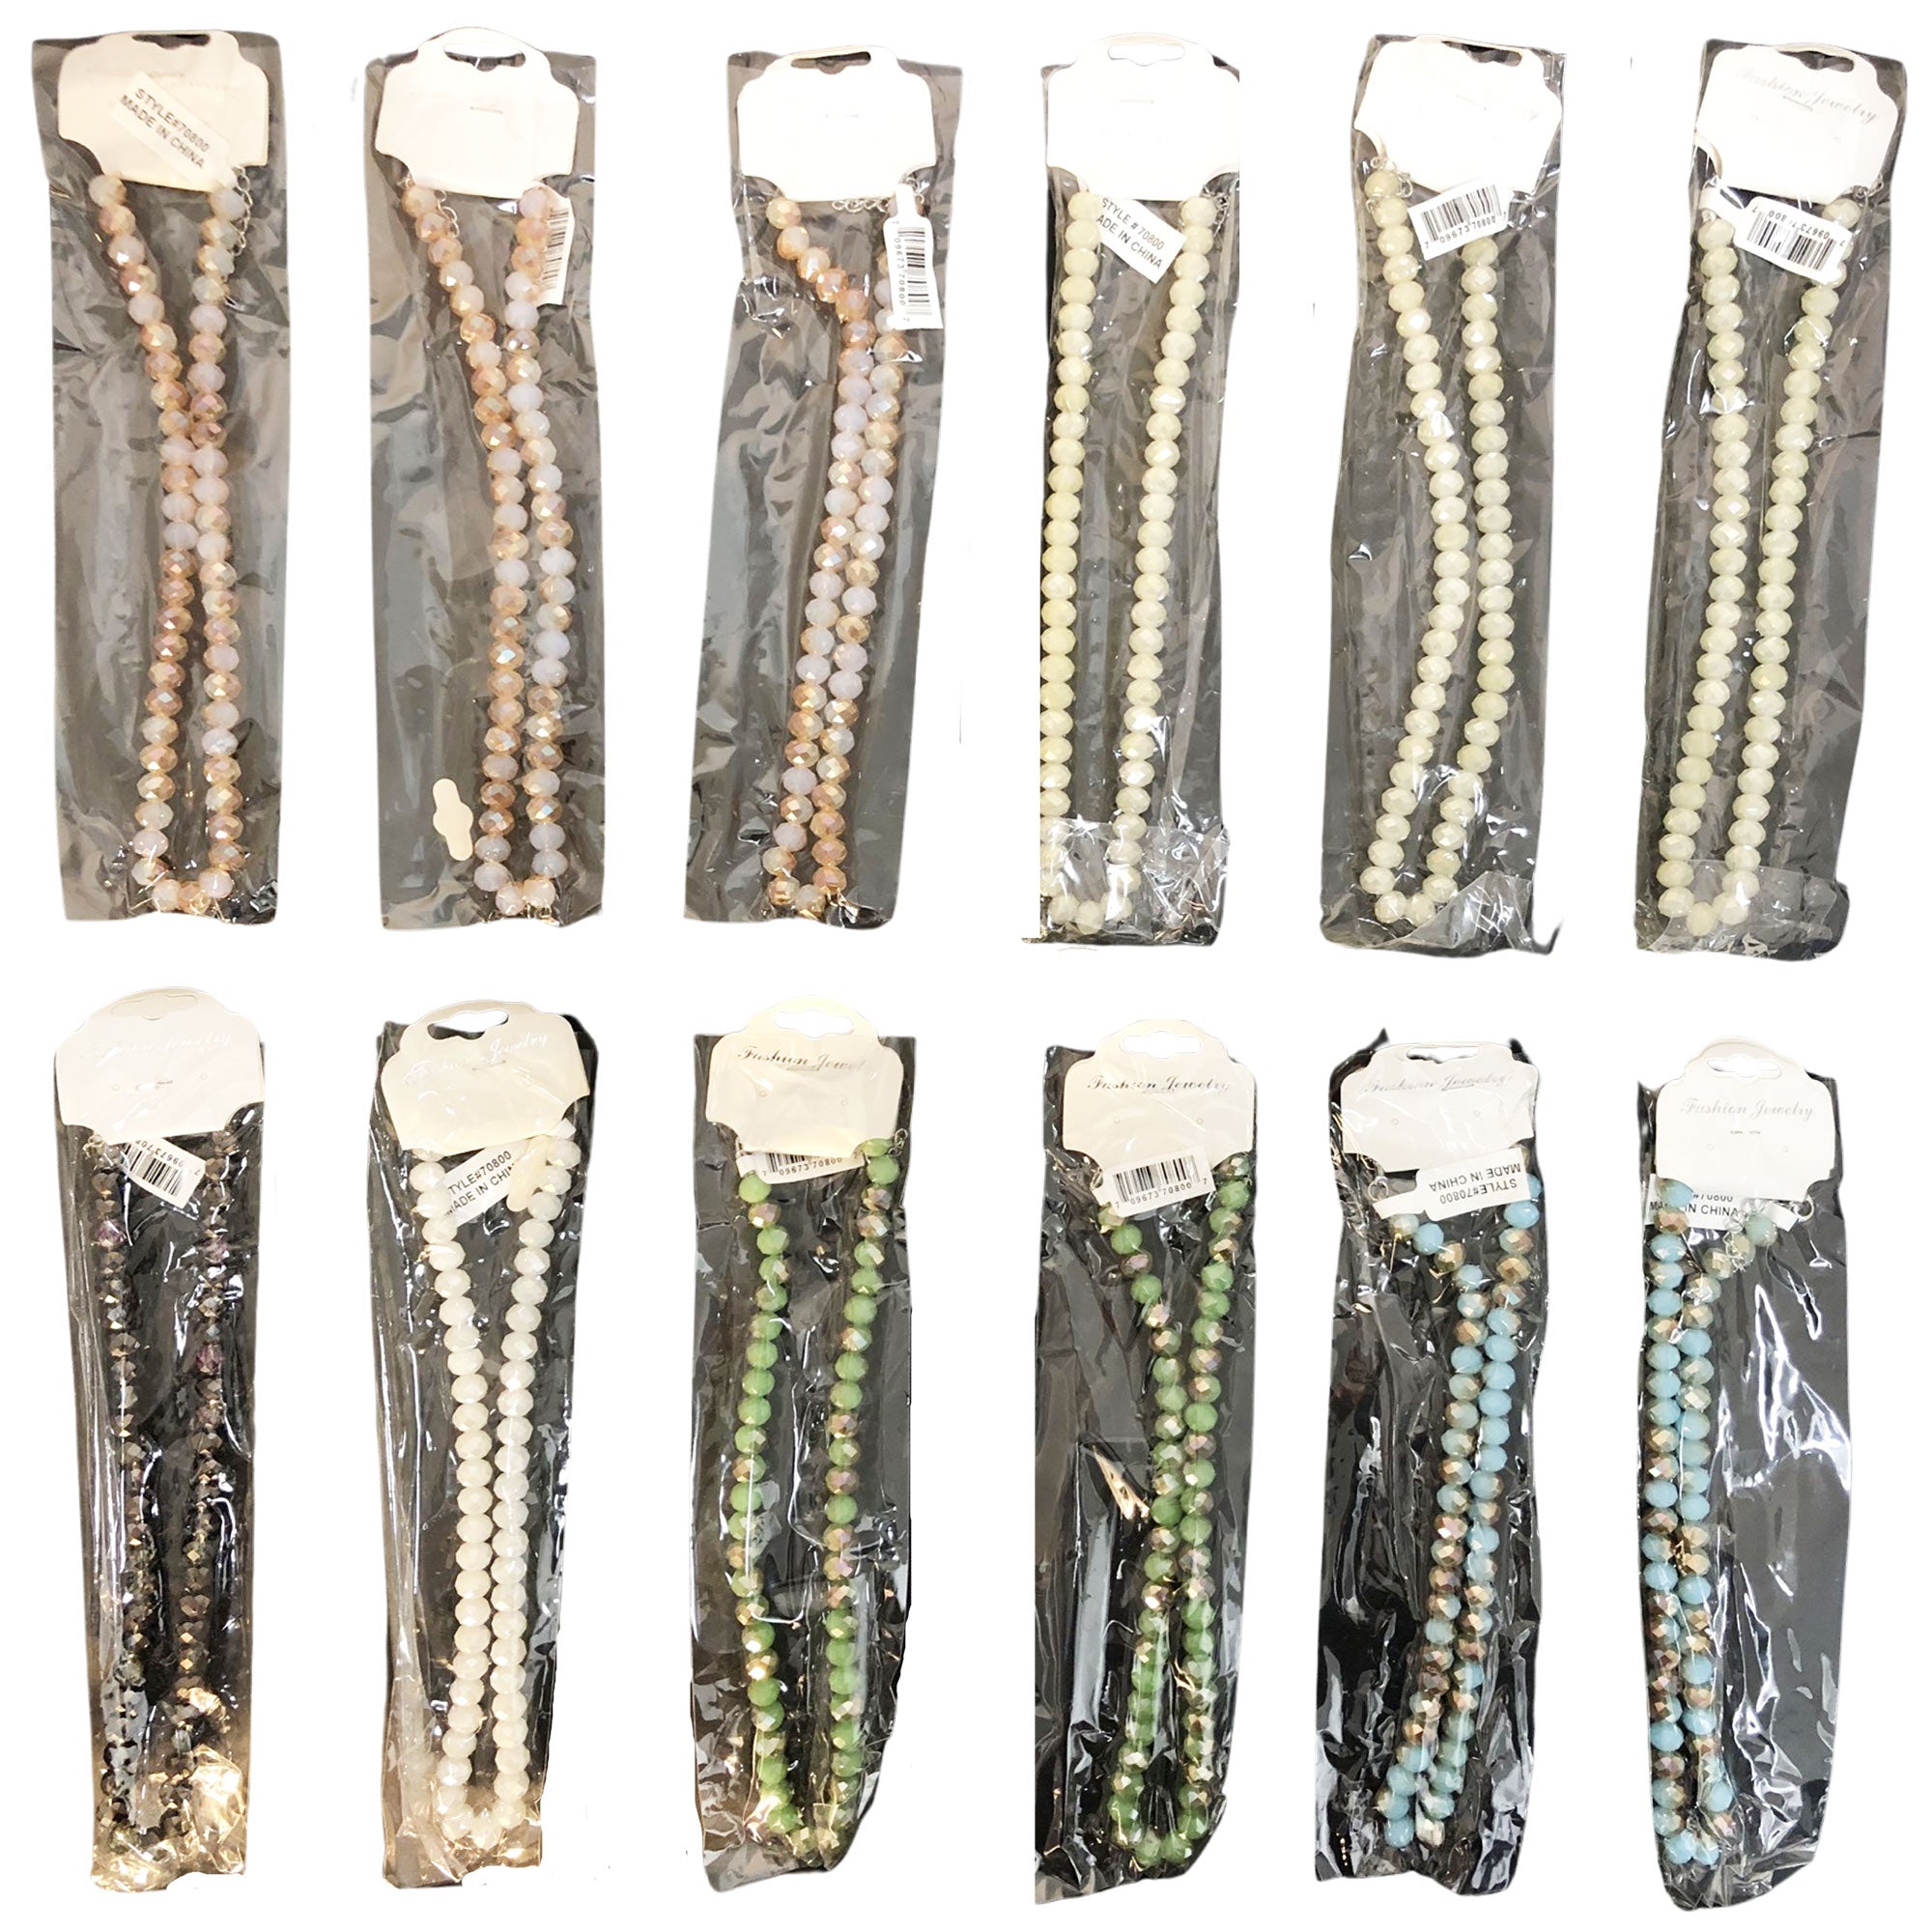 CLEARANCE CRYSTAL NECKLACES (CASE OF 120 - $0.50 / PIECE)  Wholesale Crystal Necklaces in Assorted Colors SKU: 70800-120